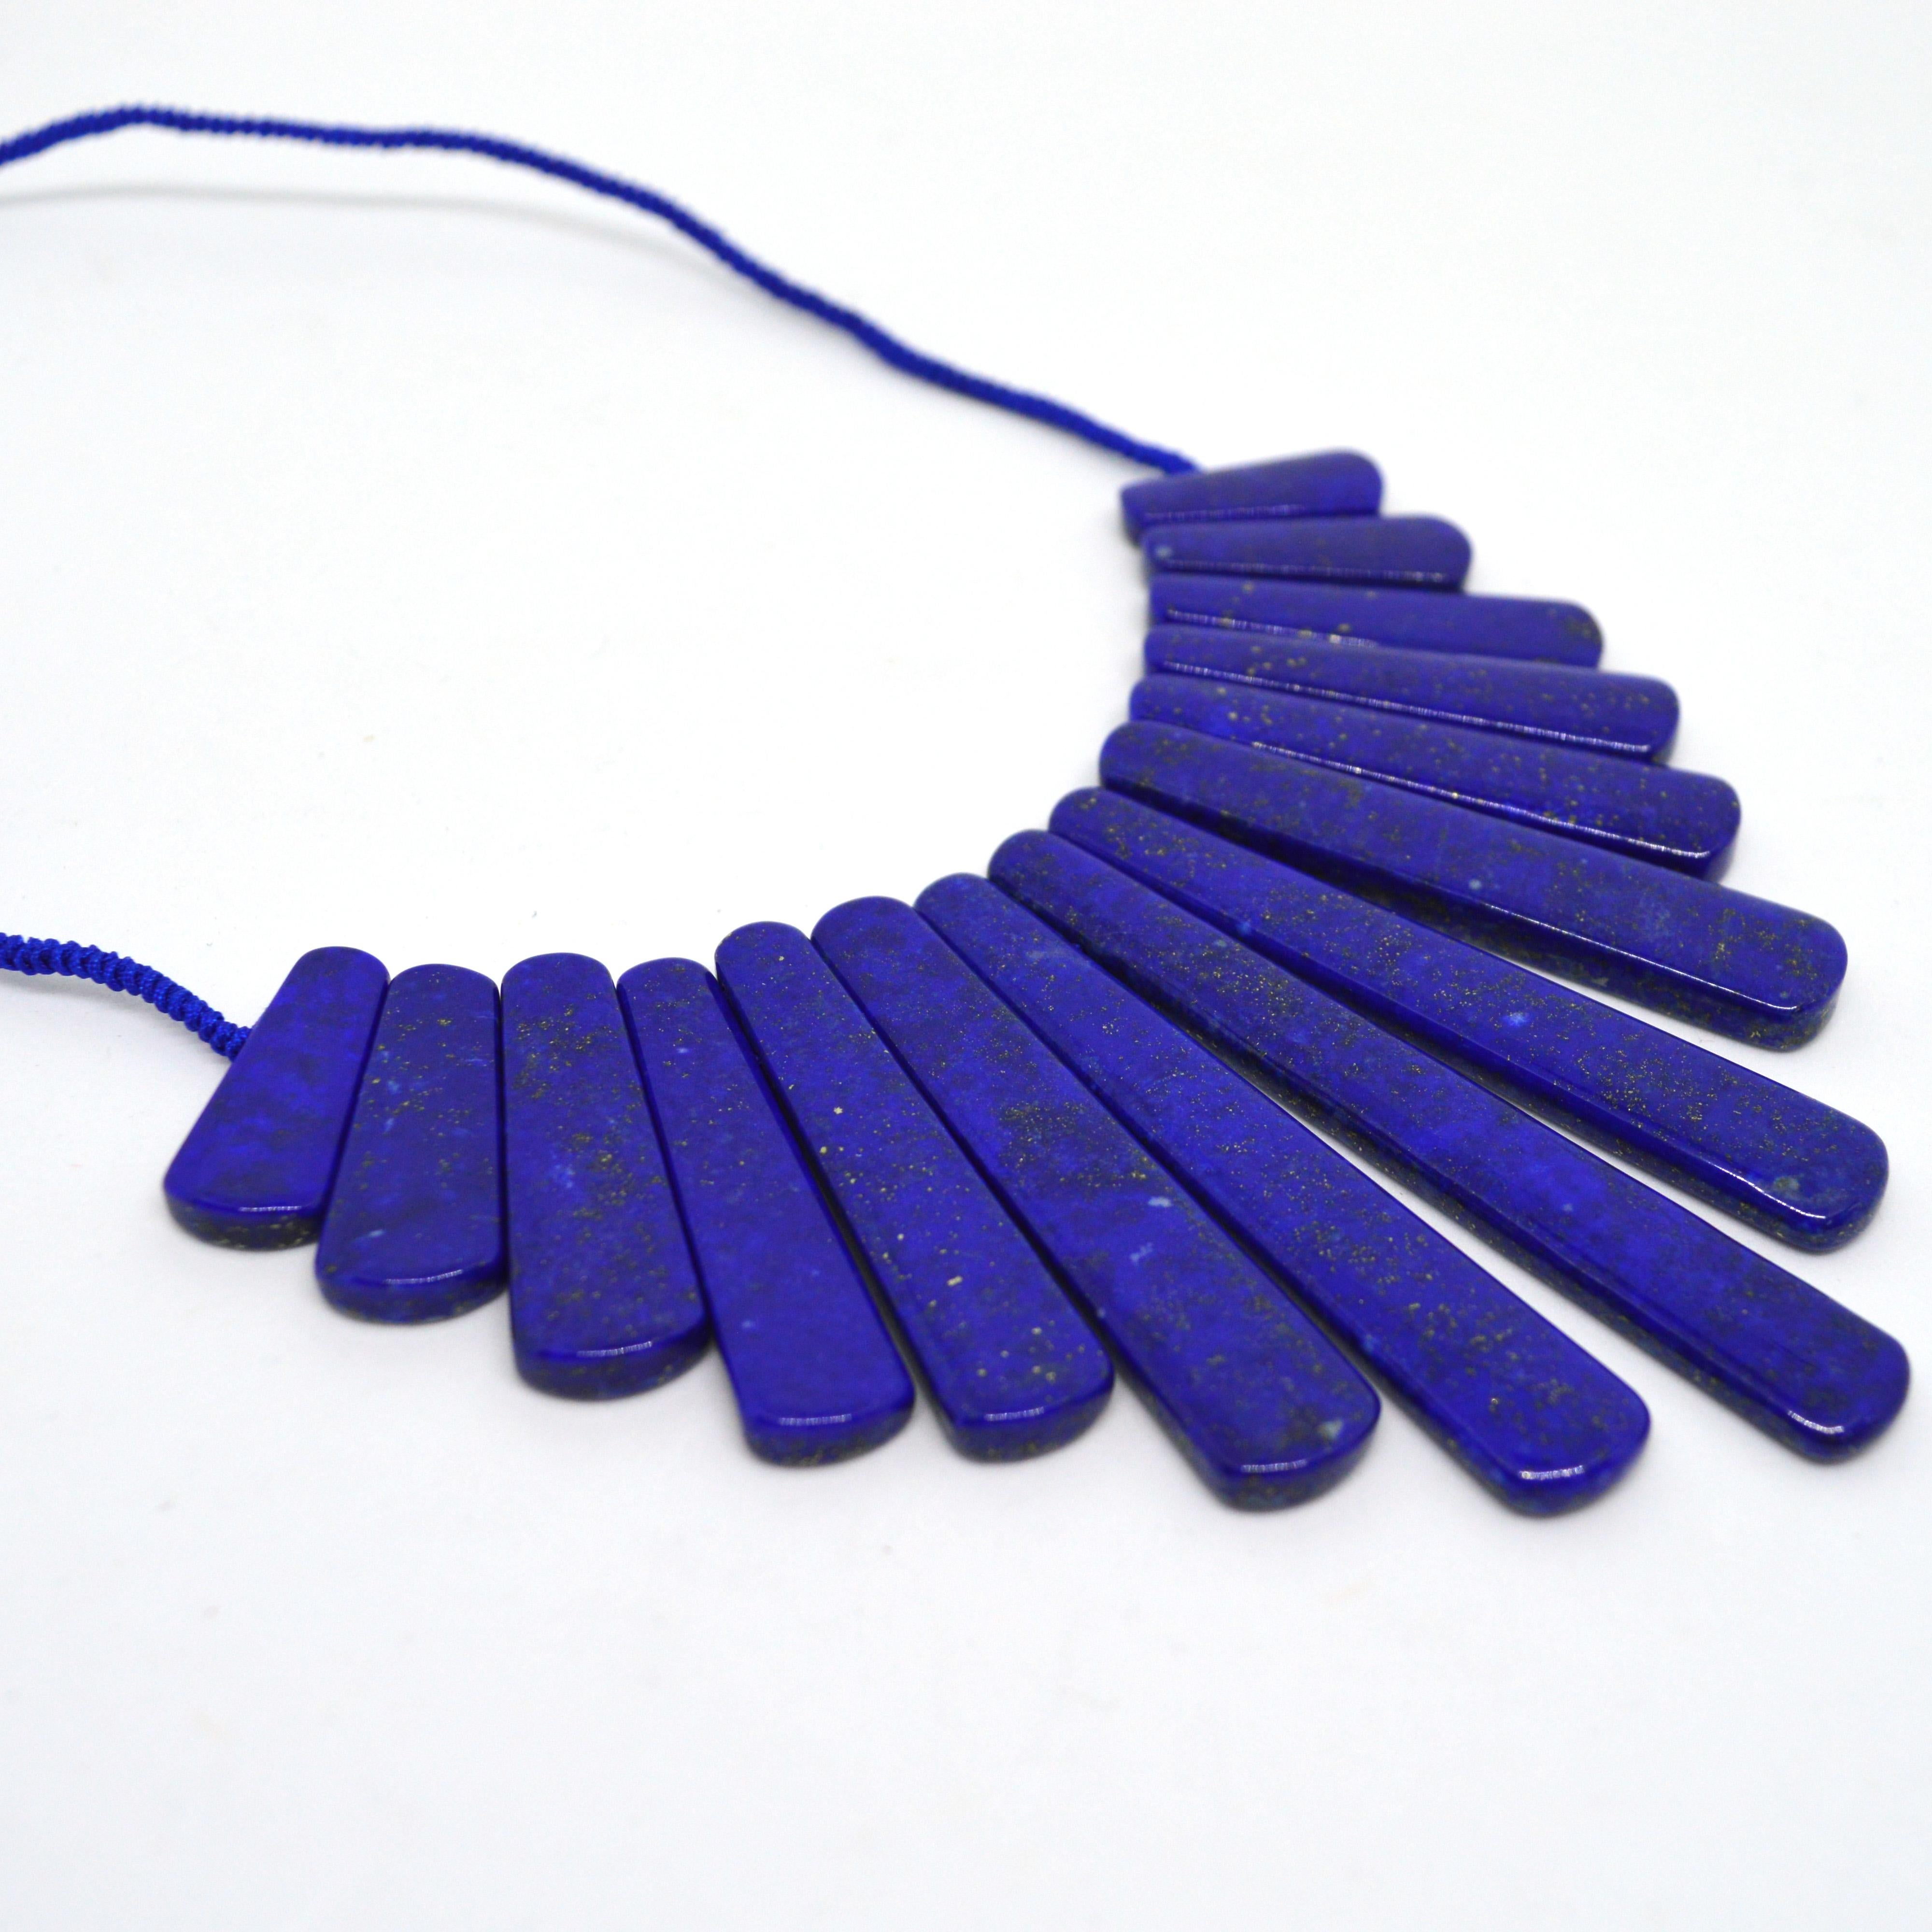 High Quality large natural Graduated Trapezoid Lapis Lazuli knotted necklace with a button Lapis Lazuli clasp. Beads Range from 25-80mm long  and the stones are 6mm thick .

Total necklace length 52mm.